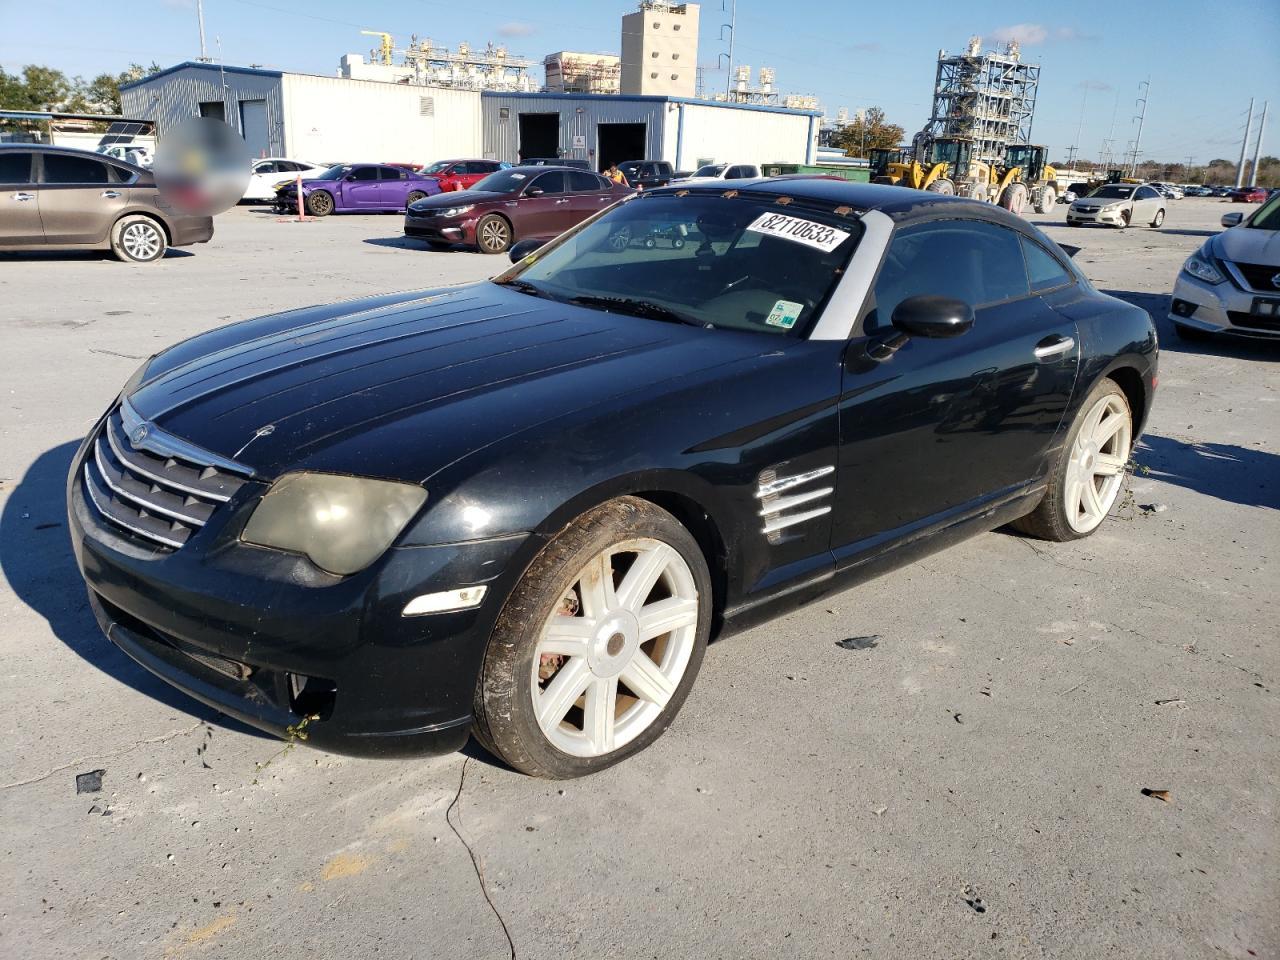 vin: 1C3AN69L94X003406 1C3AN69L94X003406 2004 chrysler crossfire 3200 for Sale in 70129 2348, La - New Orleans, New Orleans, USA